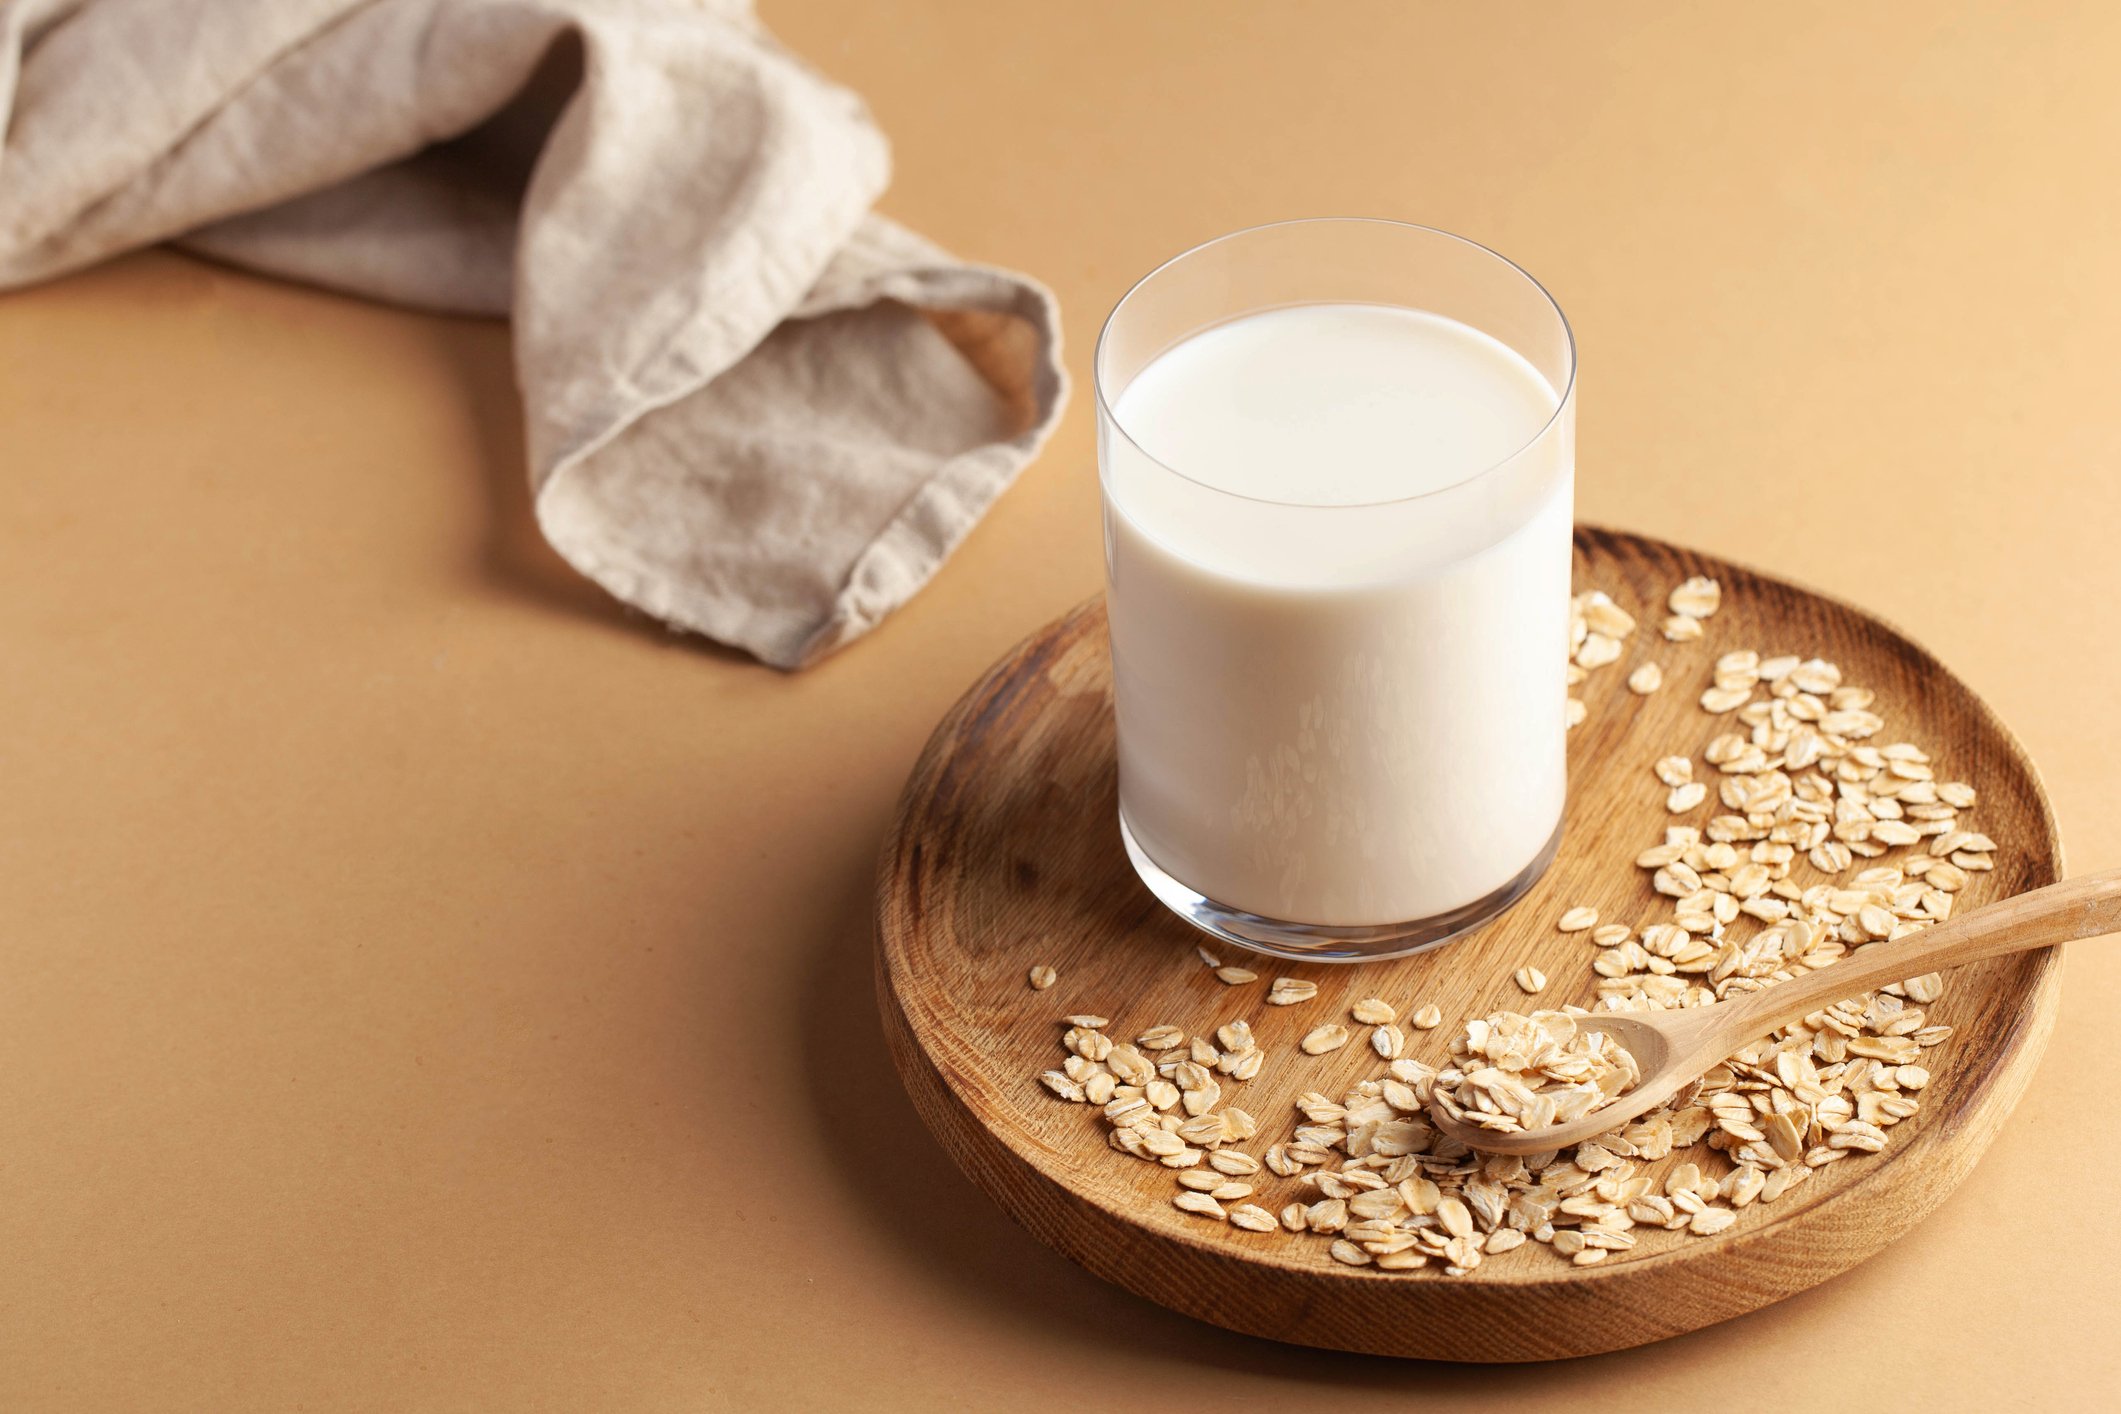 Thanks to its frothiness, oat milk is the most preferred milk for coffees. (iStock Photo)